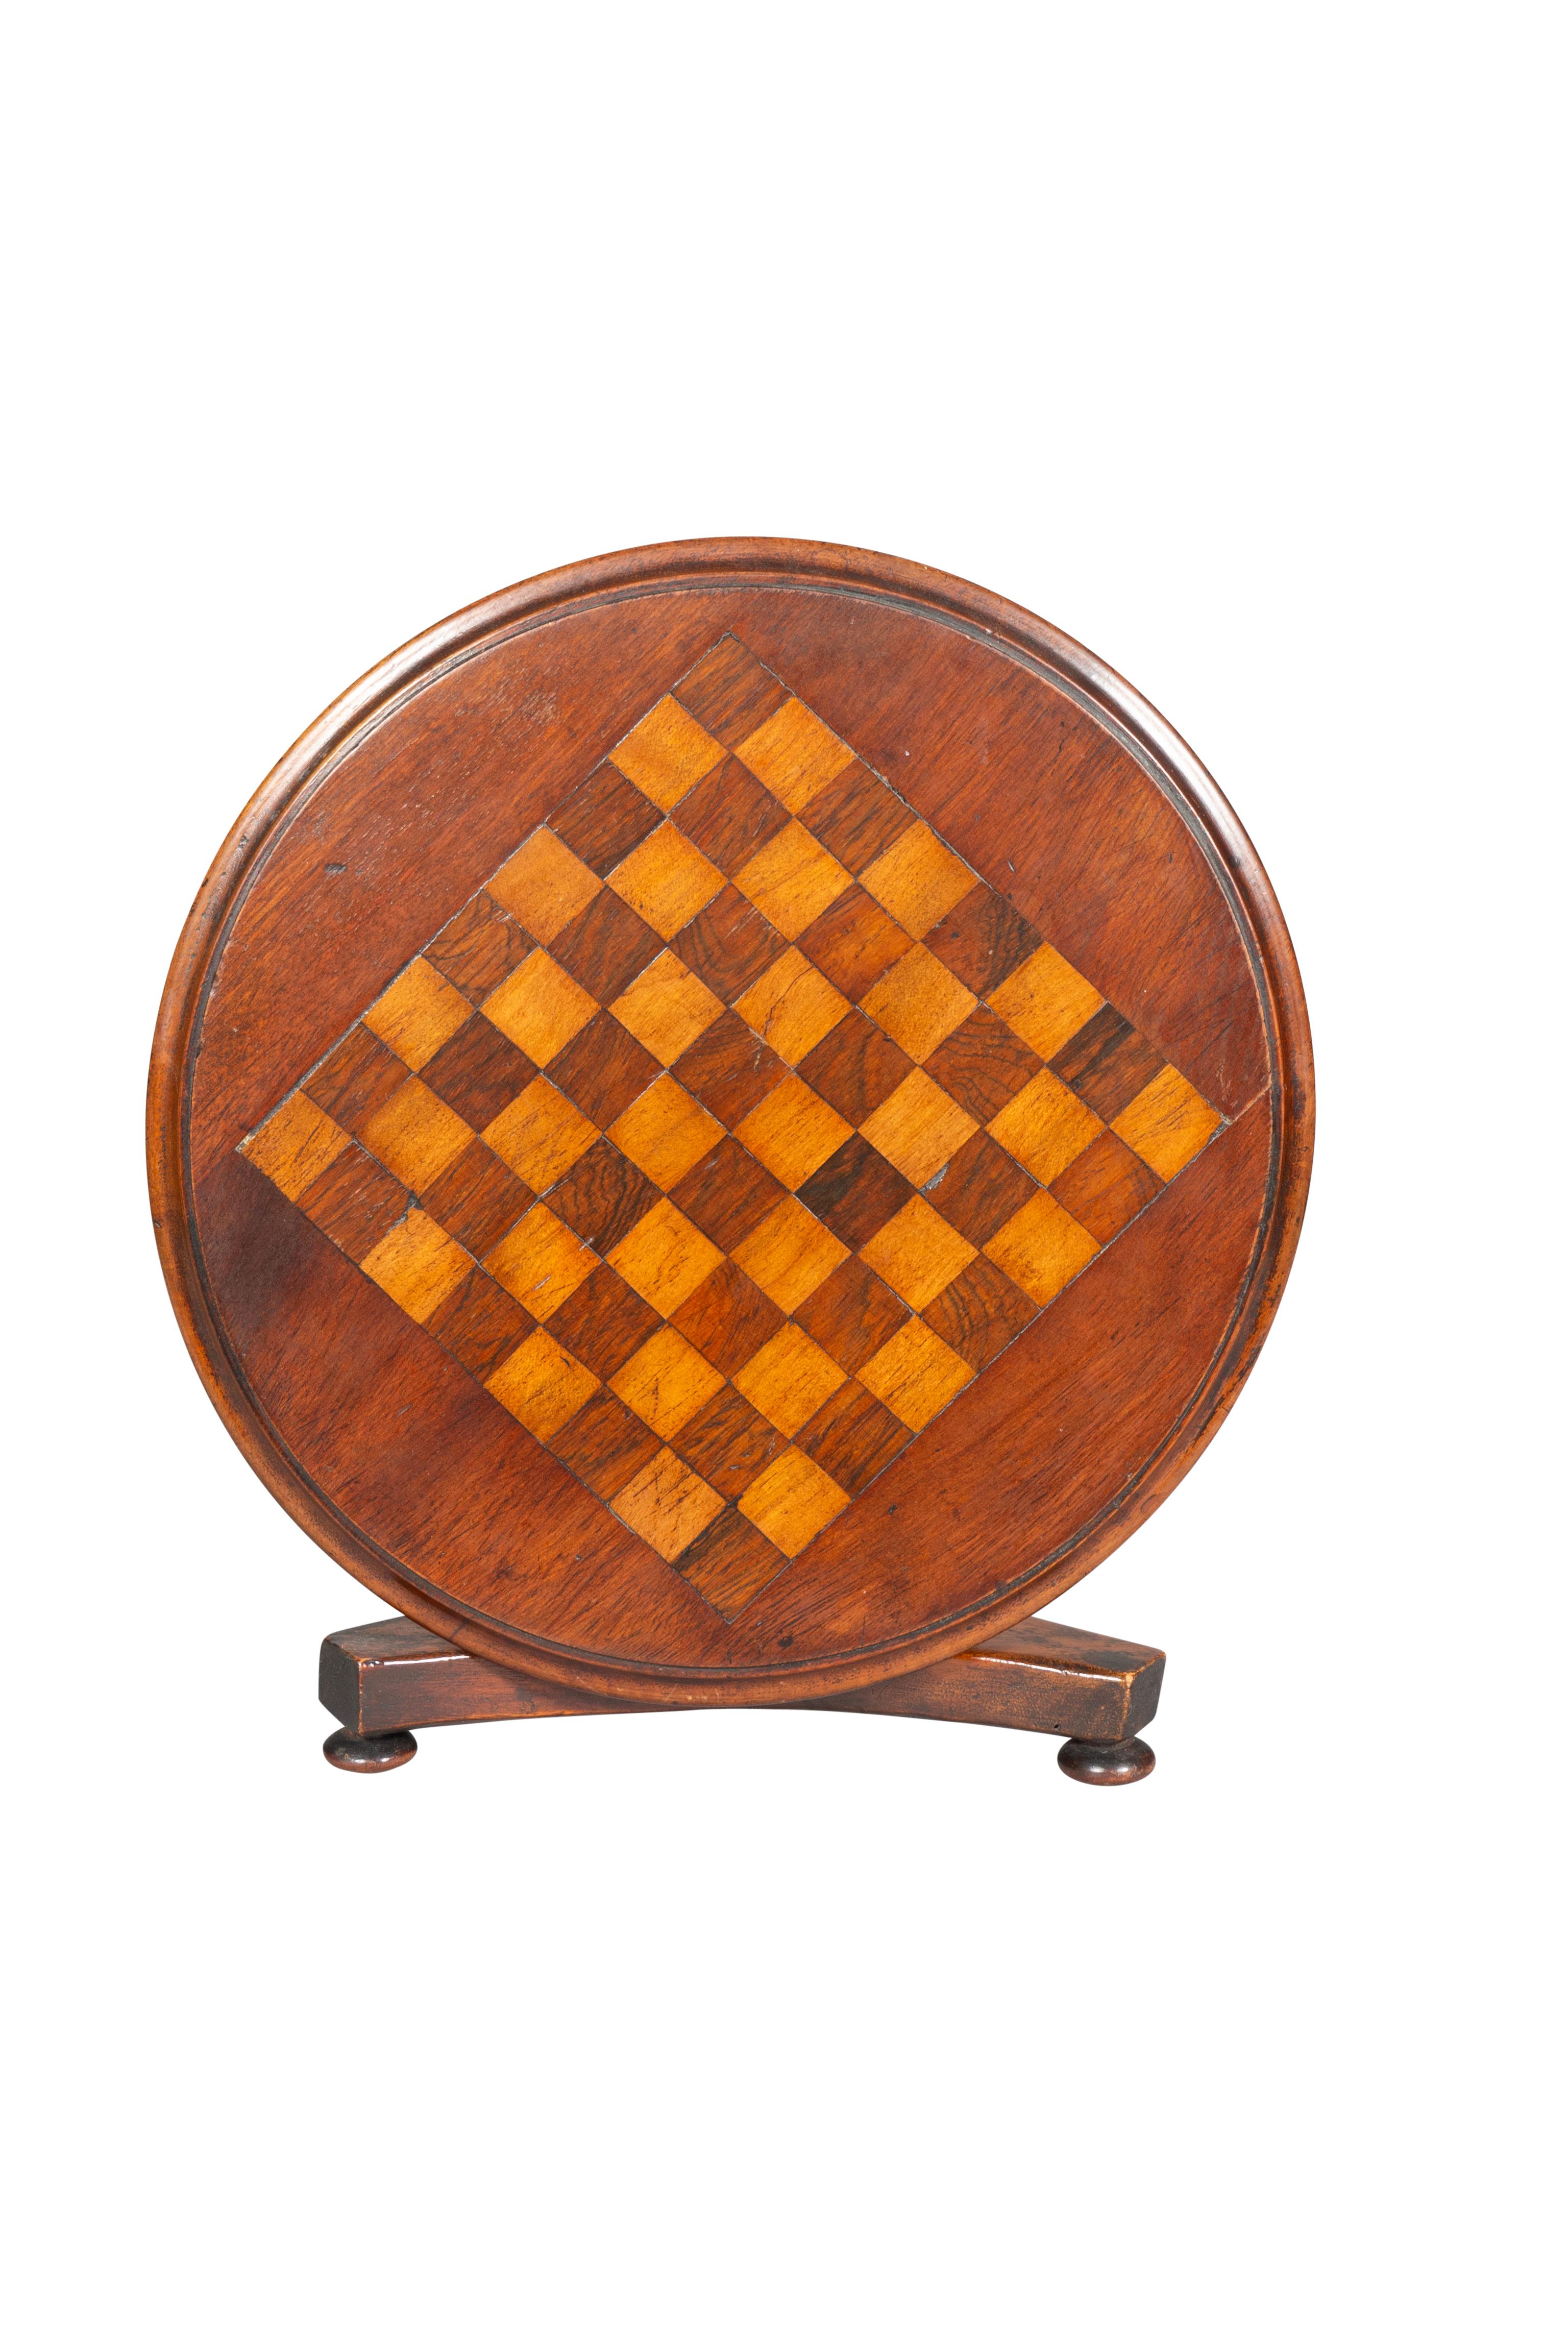 With tilt top with checkerboard inlay on a turned support and tripartite base and bun feet.